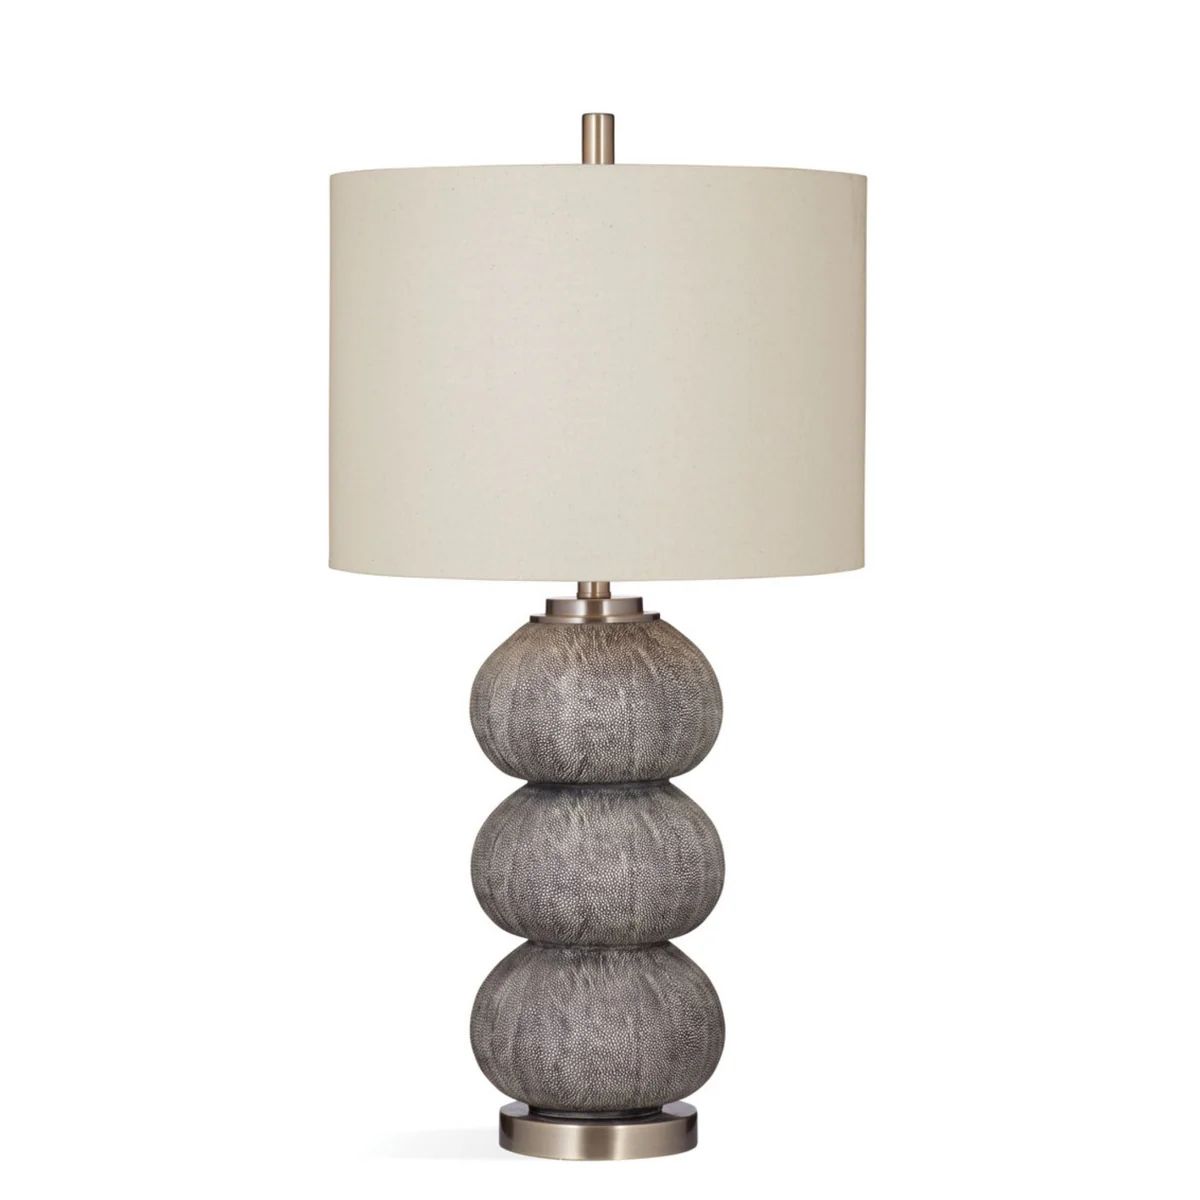 Jed Table Lamp | Outrageous Interiors + Design